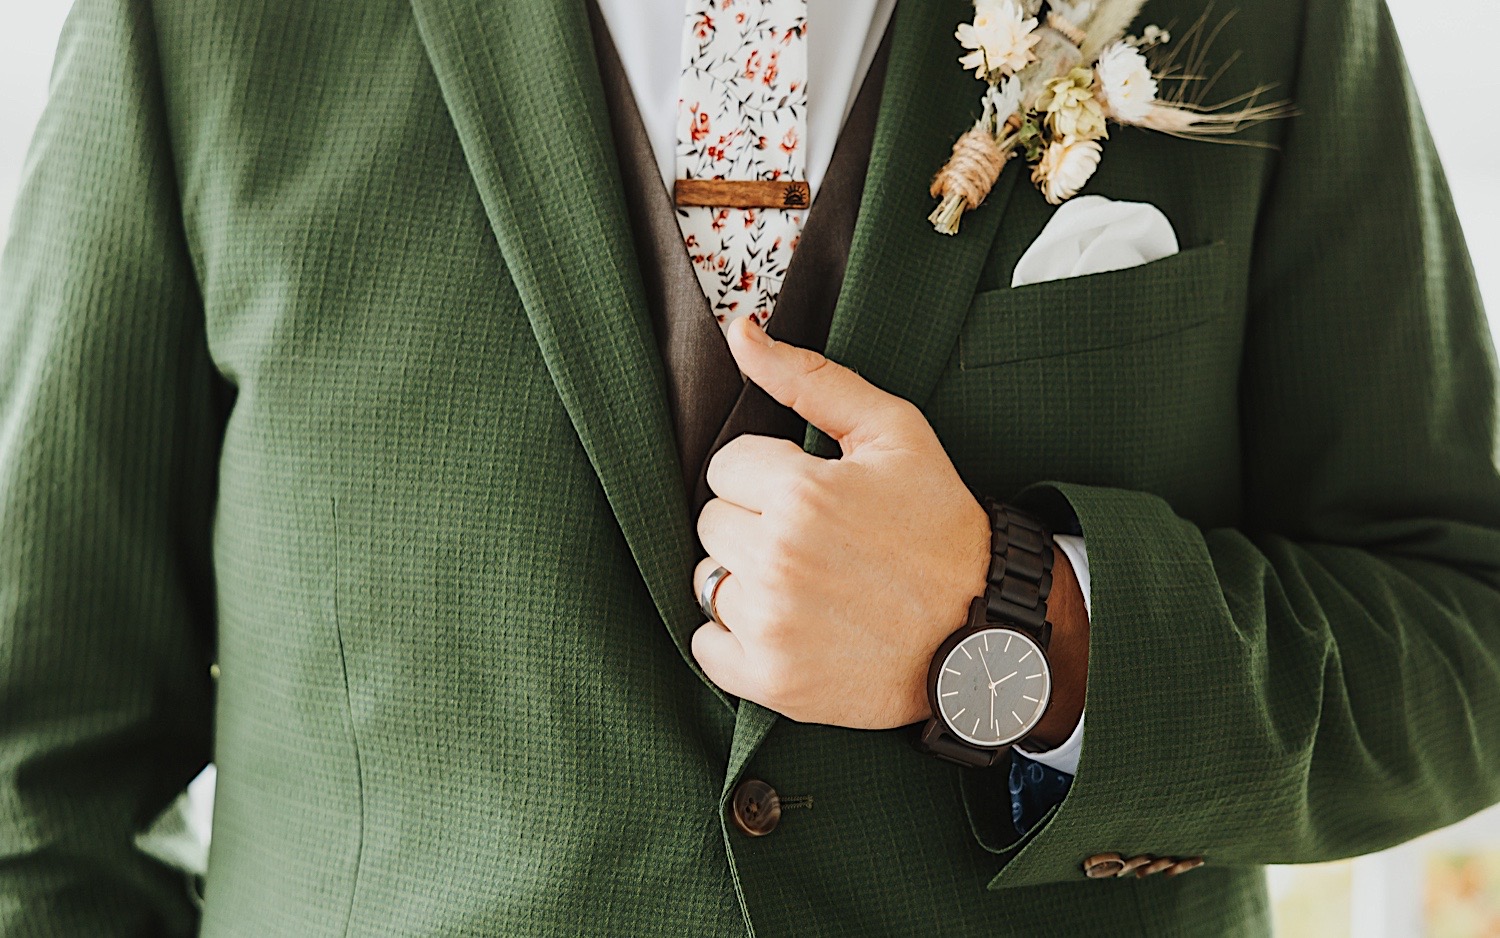 Close up photo of a groom's hand holding his green suit coat and showing off the watch on his wrist